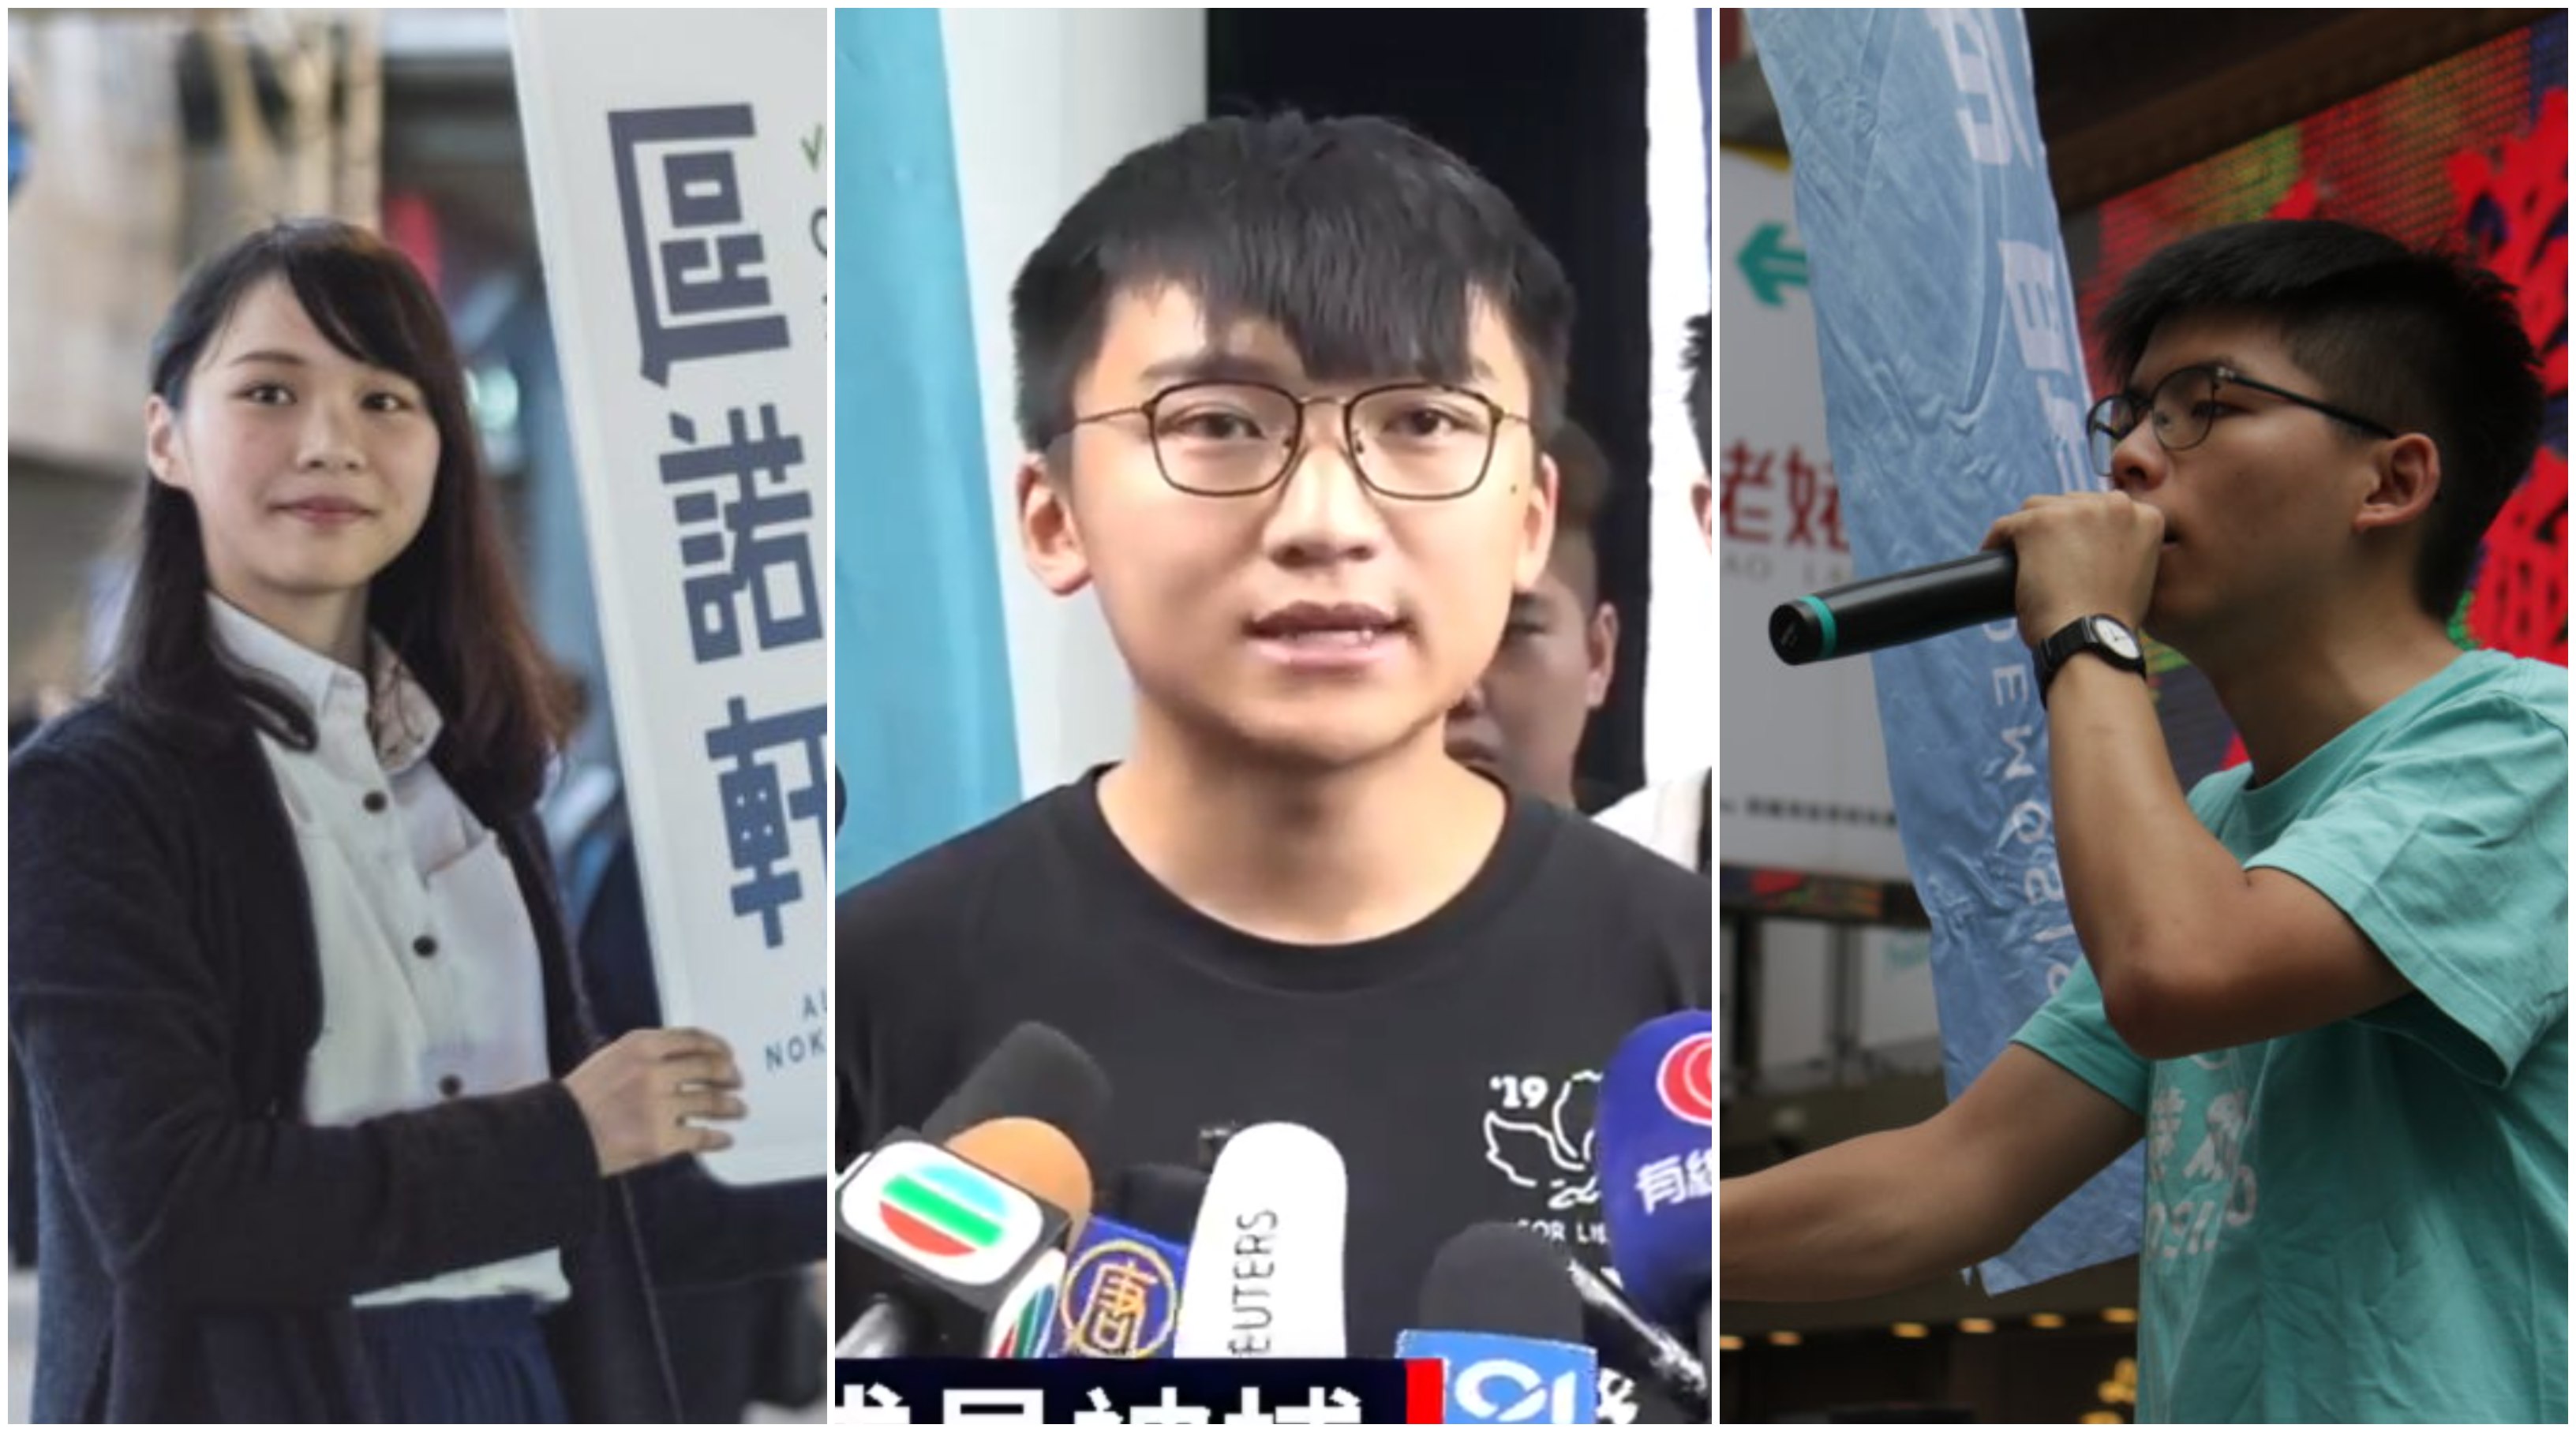 Demosisto party member Isaac Cheng speaks to the press today (center) about the arrests of fellow members Joshua Wong (right) and Agnes Chow (left). Photos via Facebook/Vicky Wong.